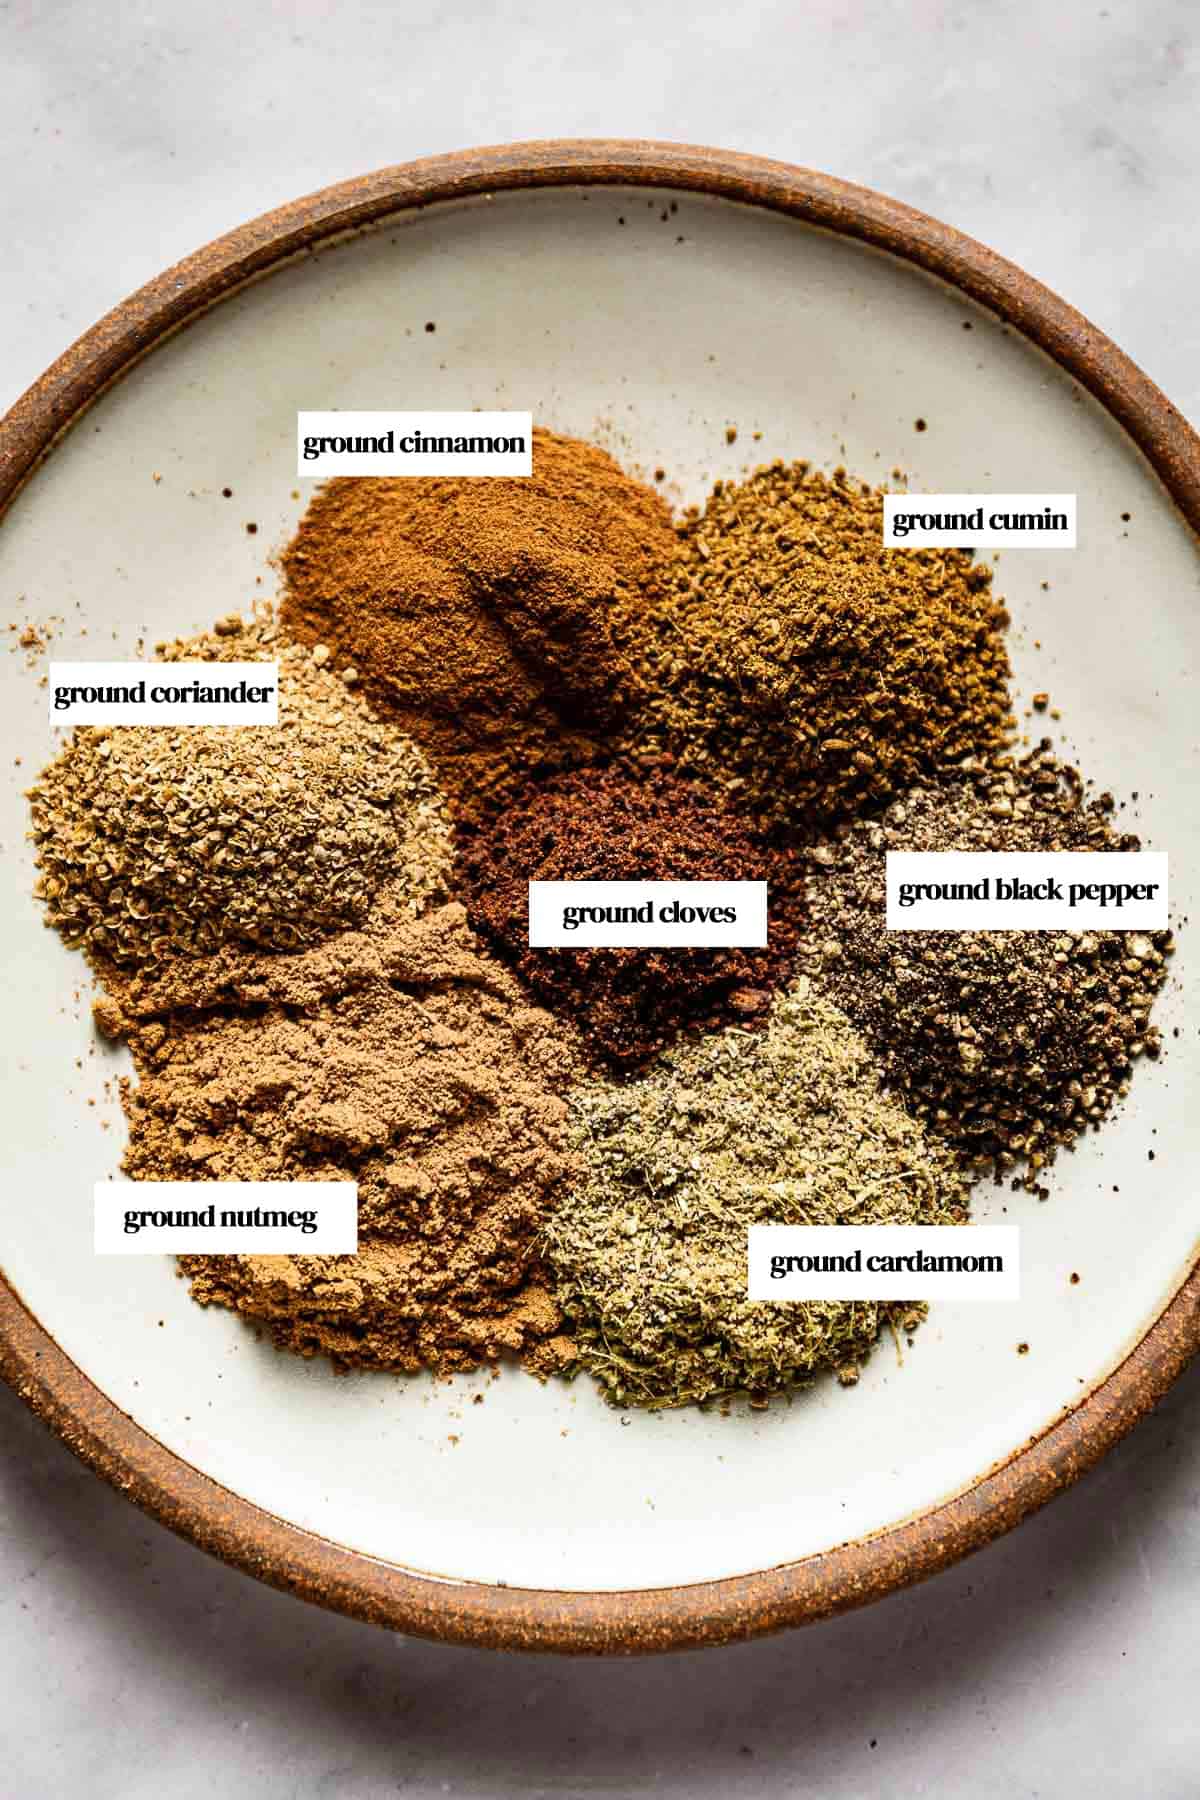 Ground spices for baharat spice mix on a plate with text on each spice.